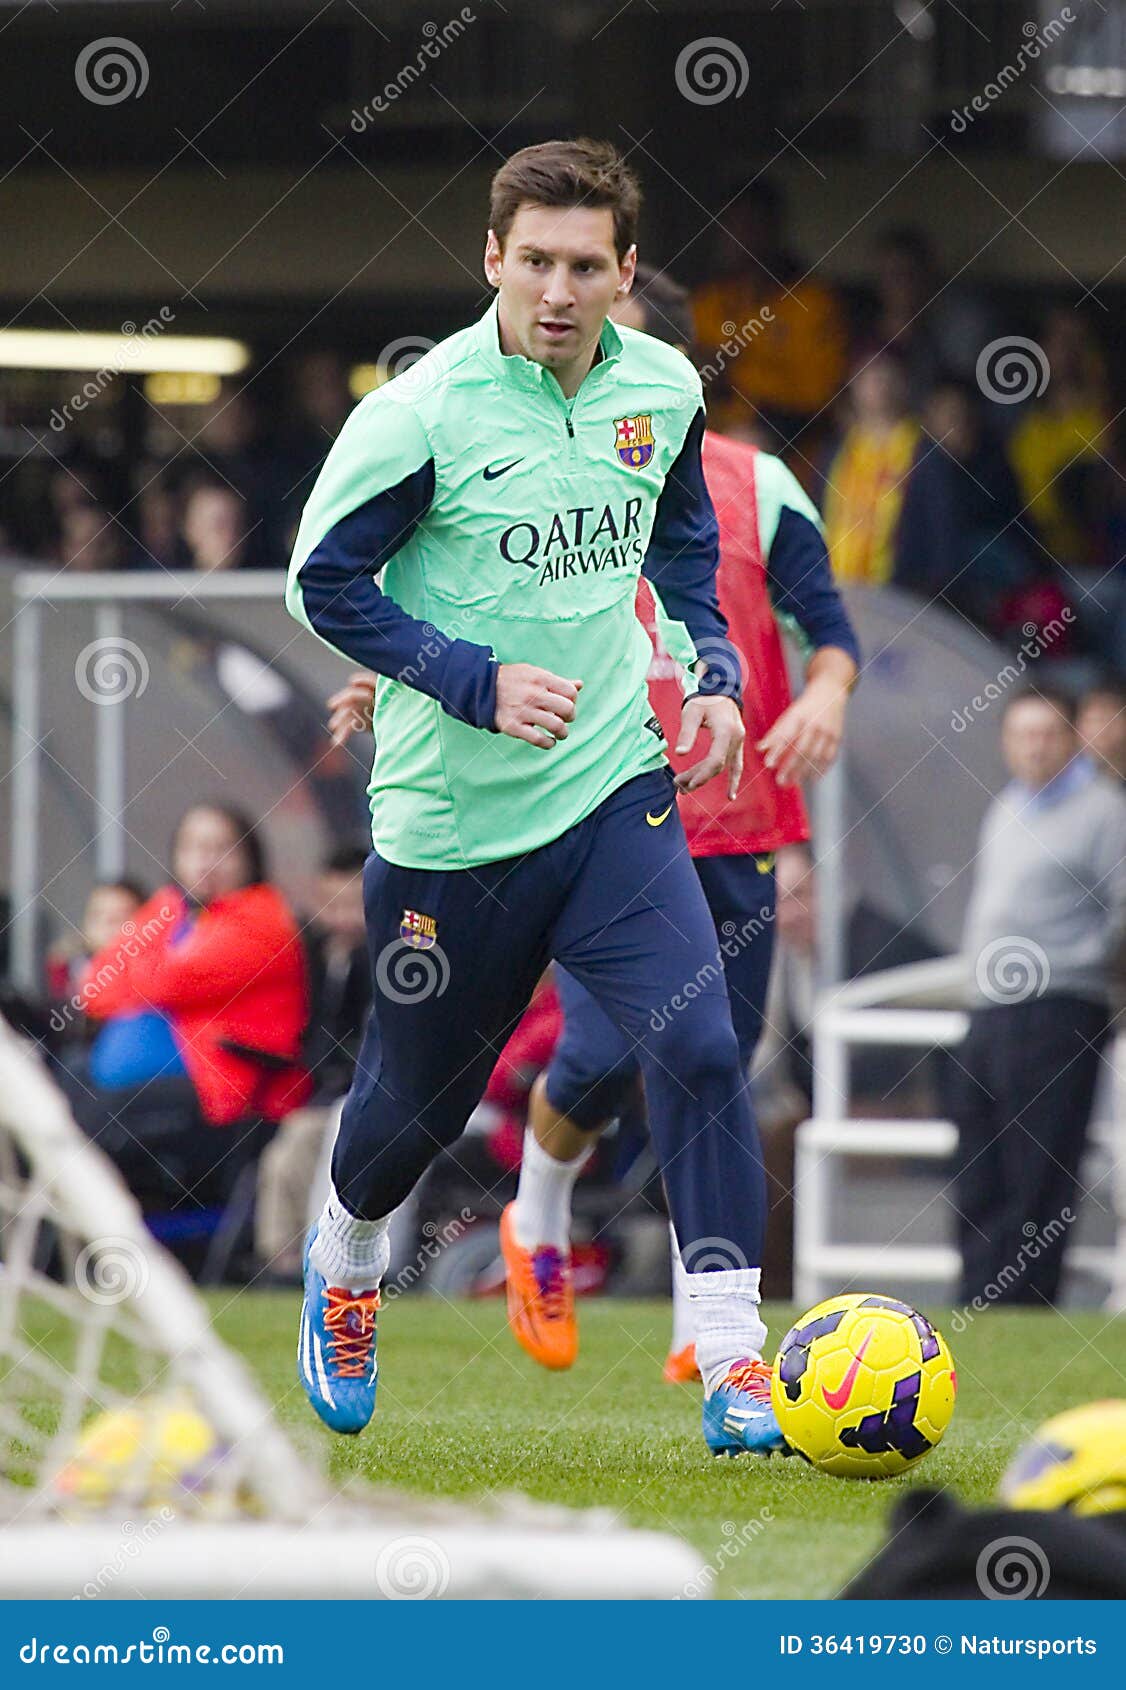 FC Barcelona training session: Last training session before the